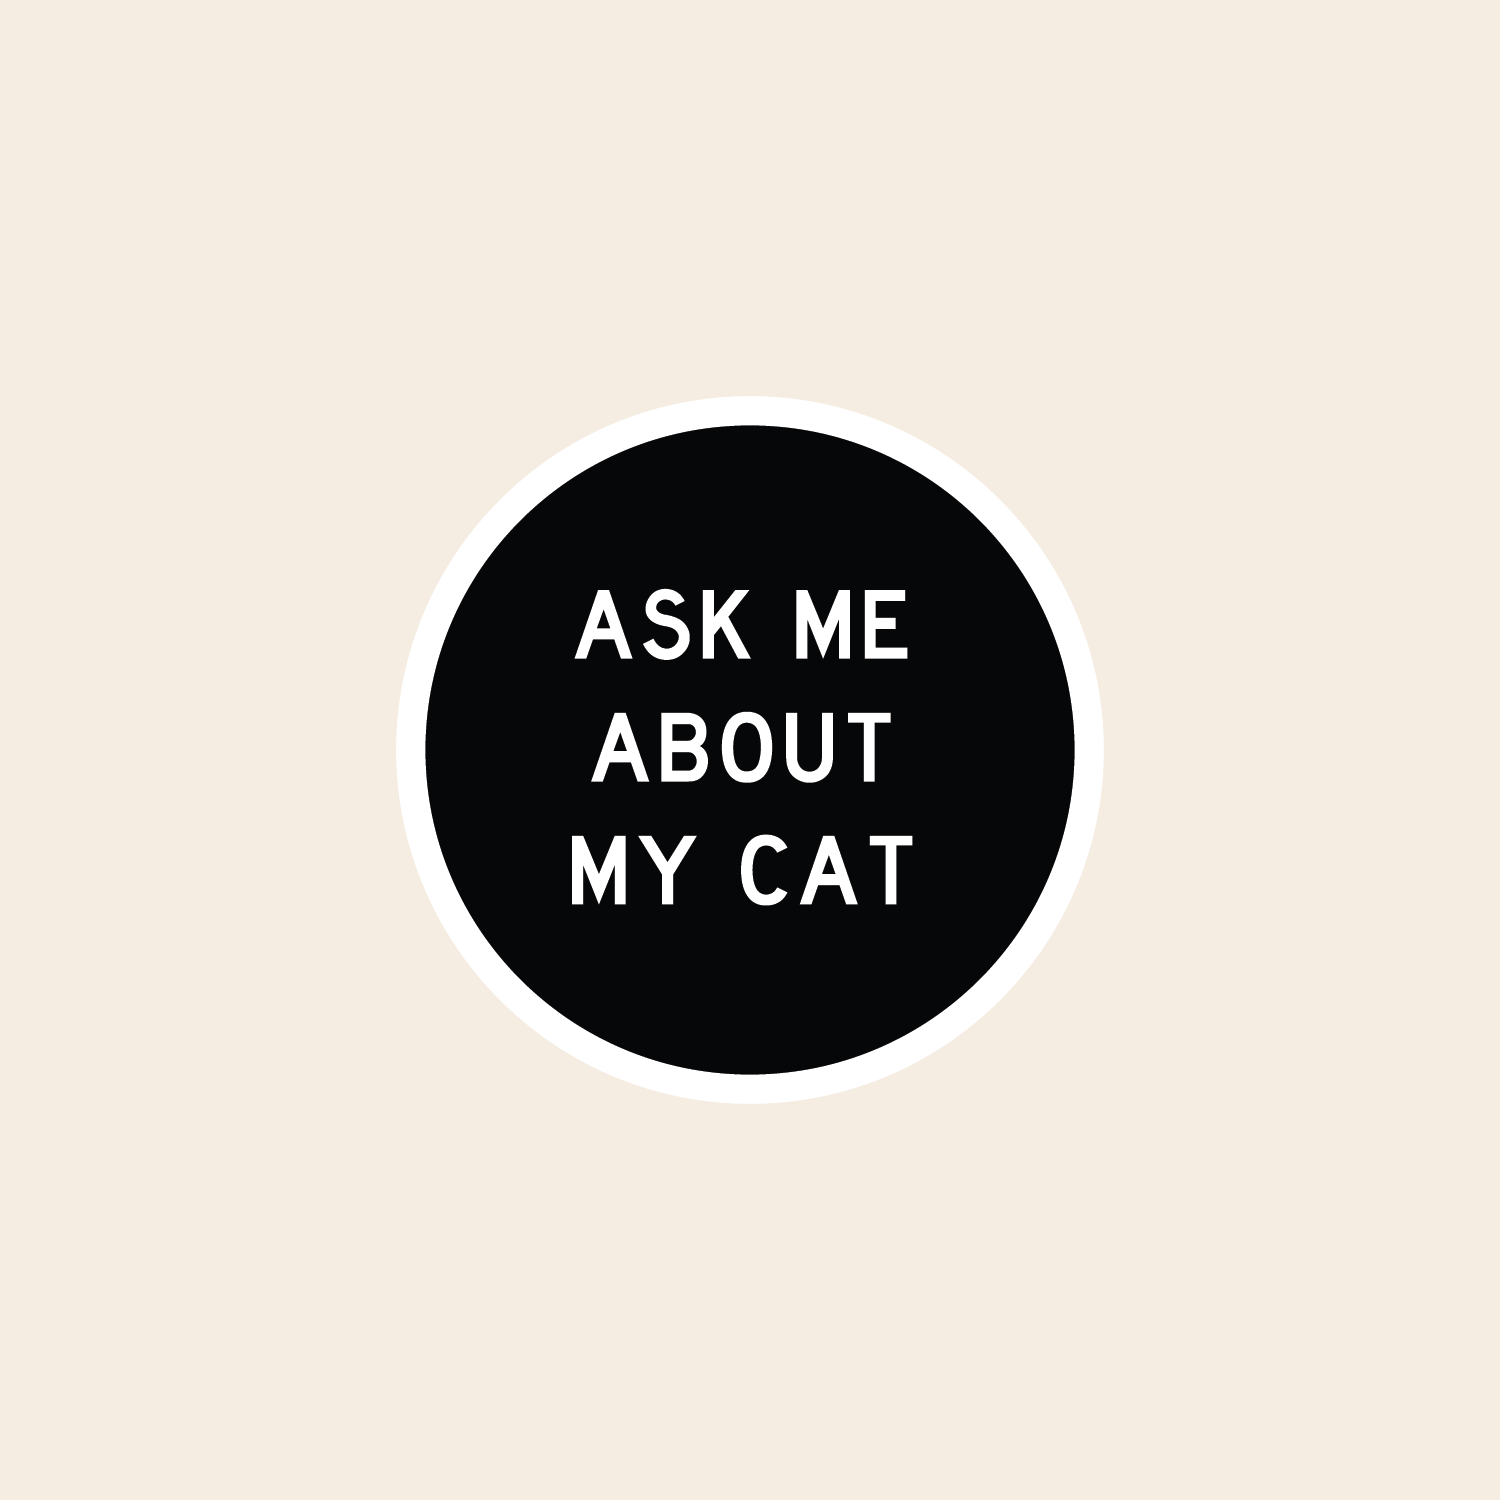 Ask Me About My Cat Sticker